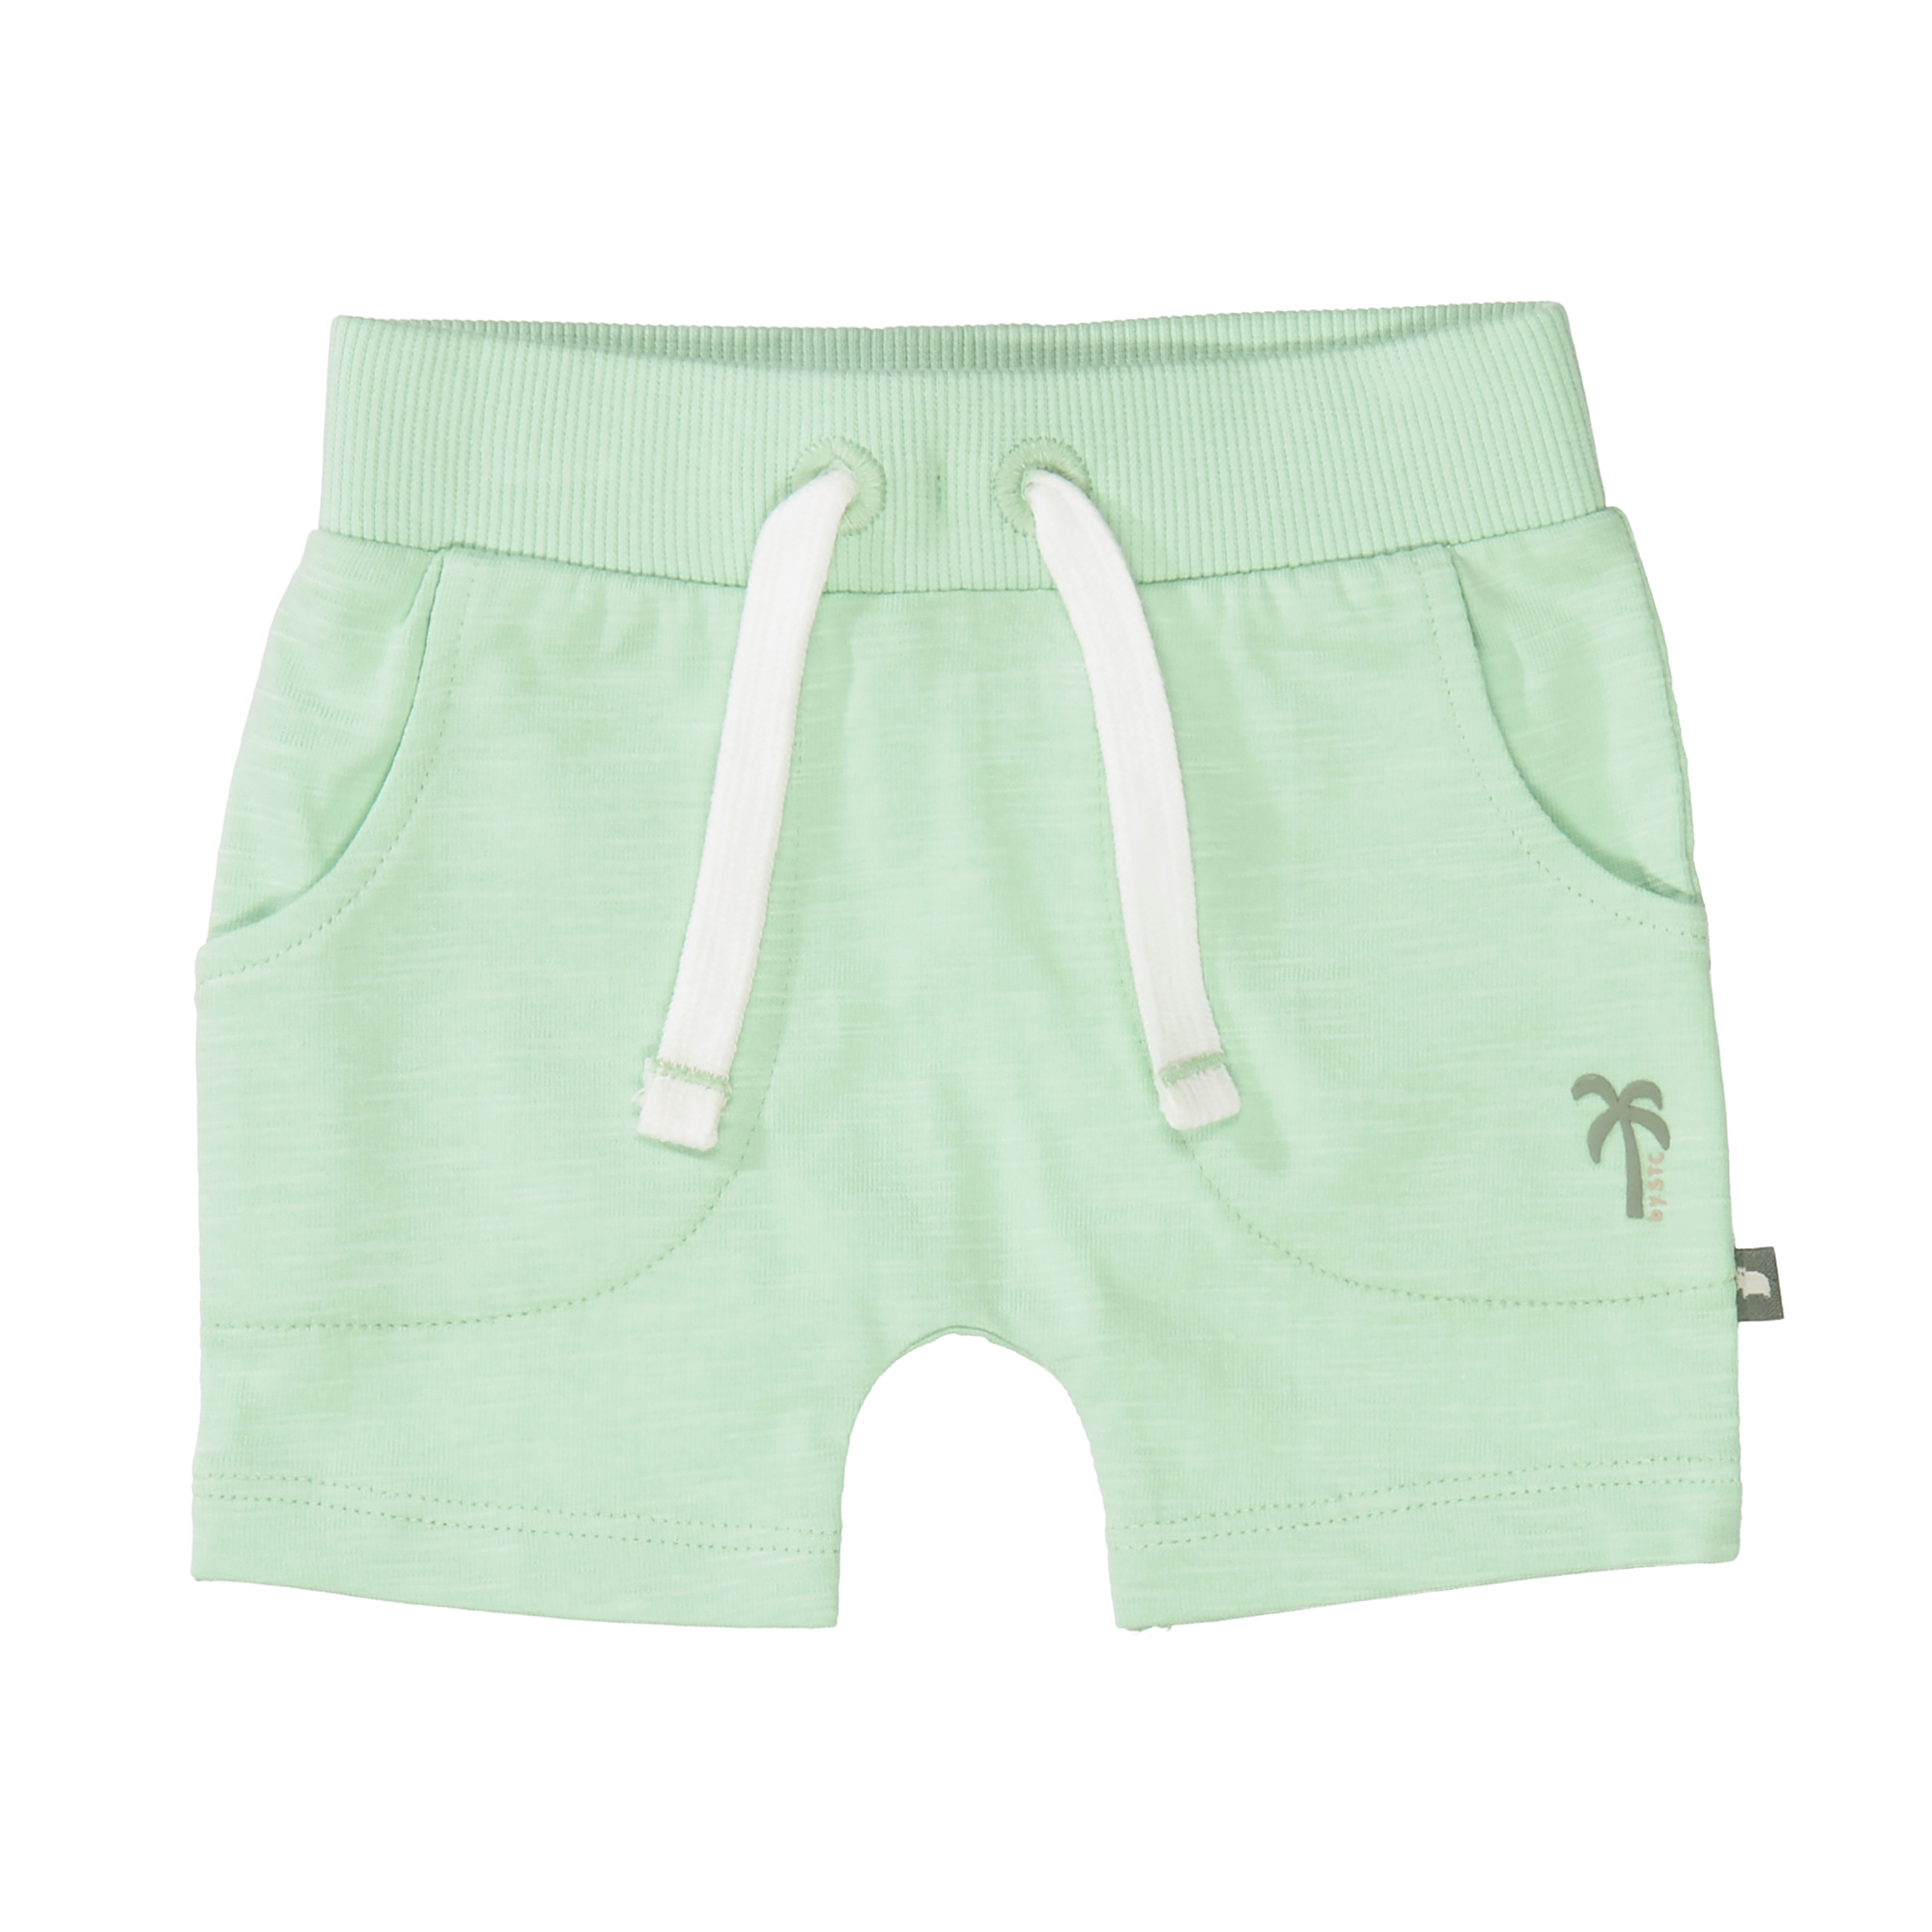 Shorts STACCATO Mint M2000585959500 1